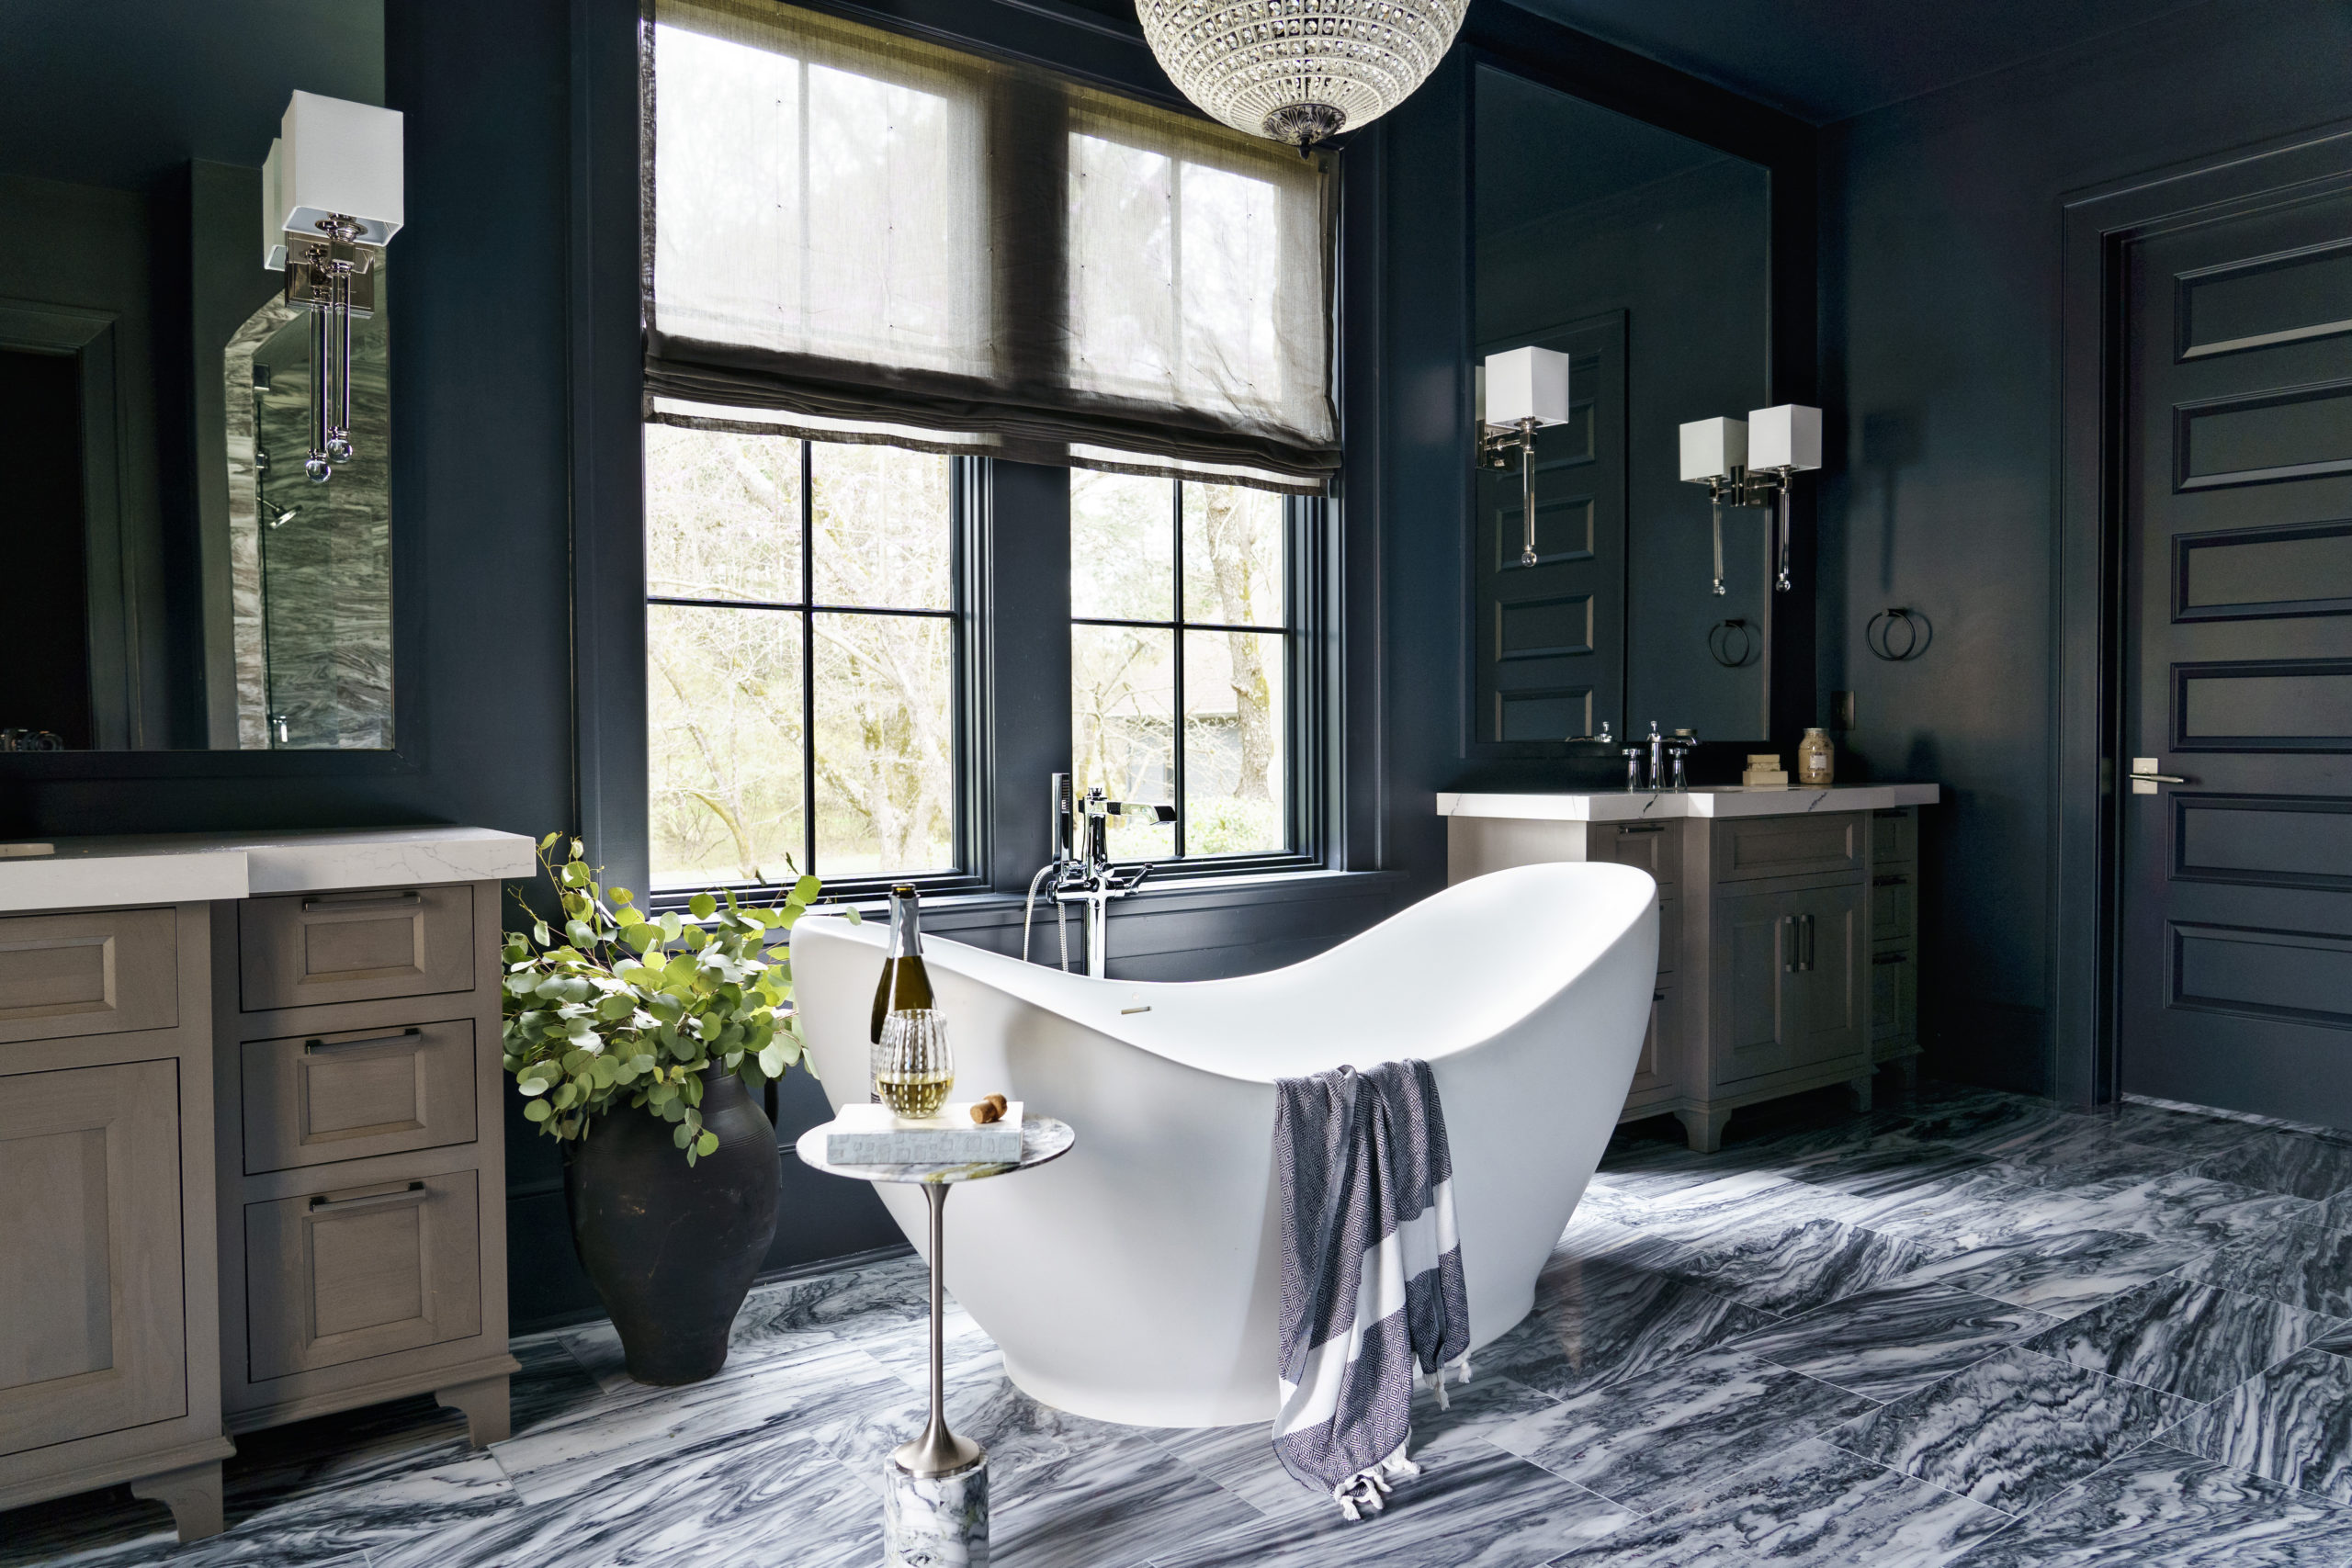 Luxurious Southern-style bathroom with centrally located bathtub.